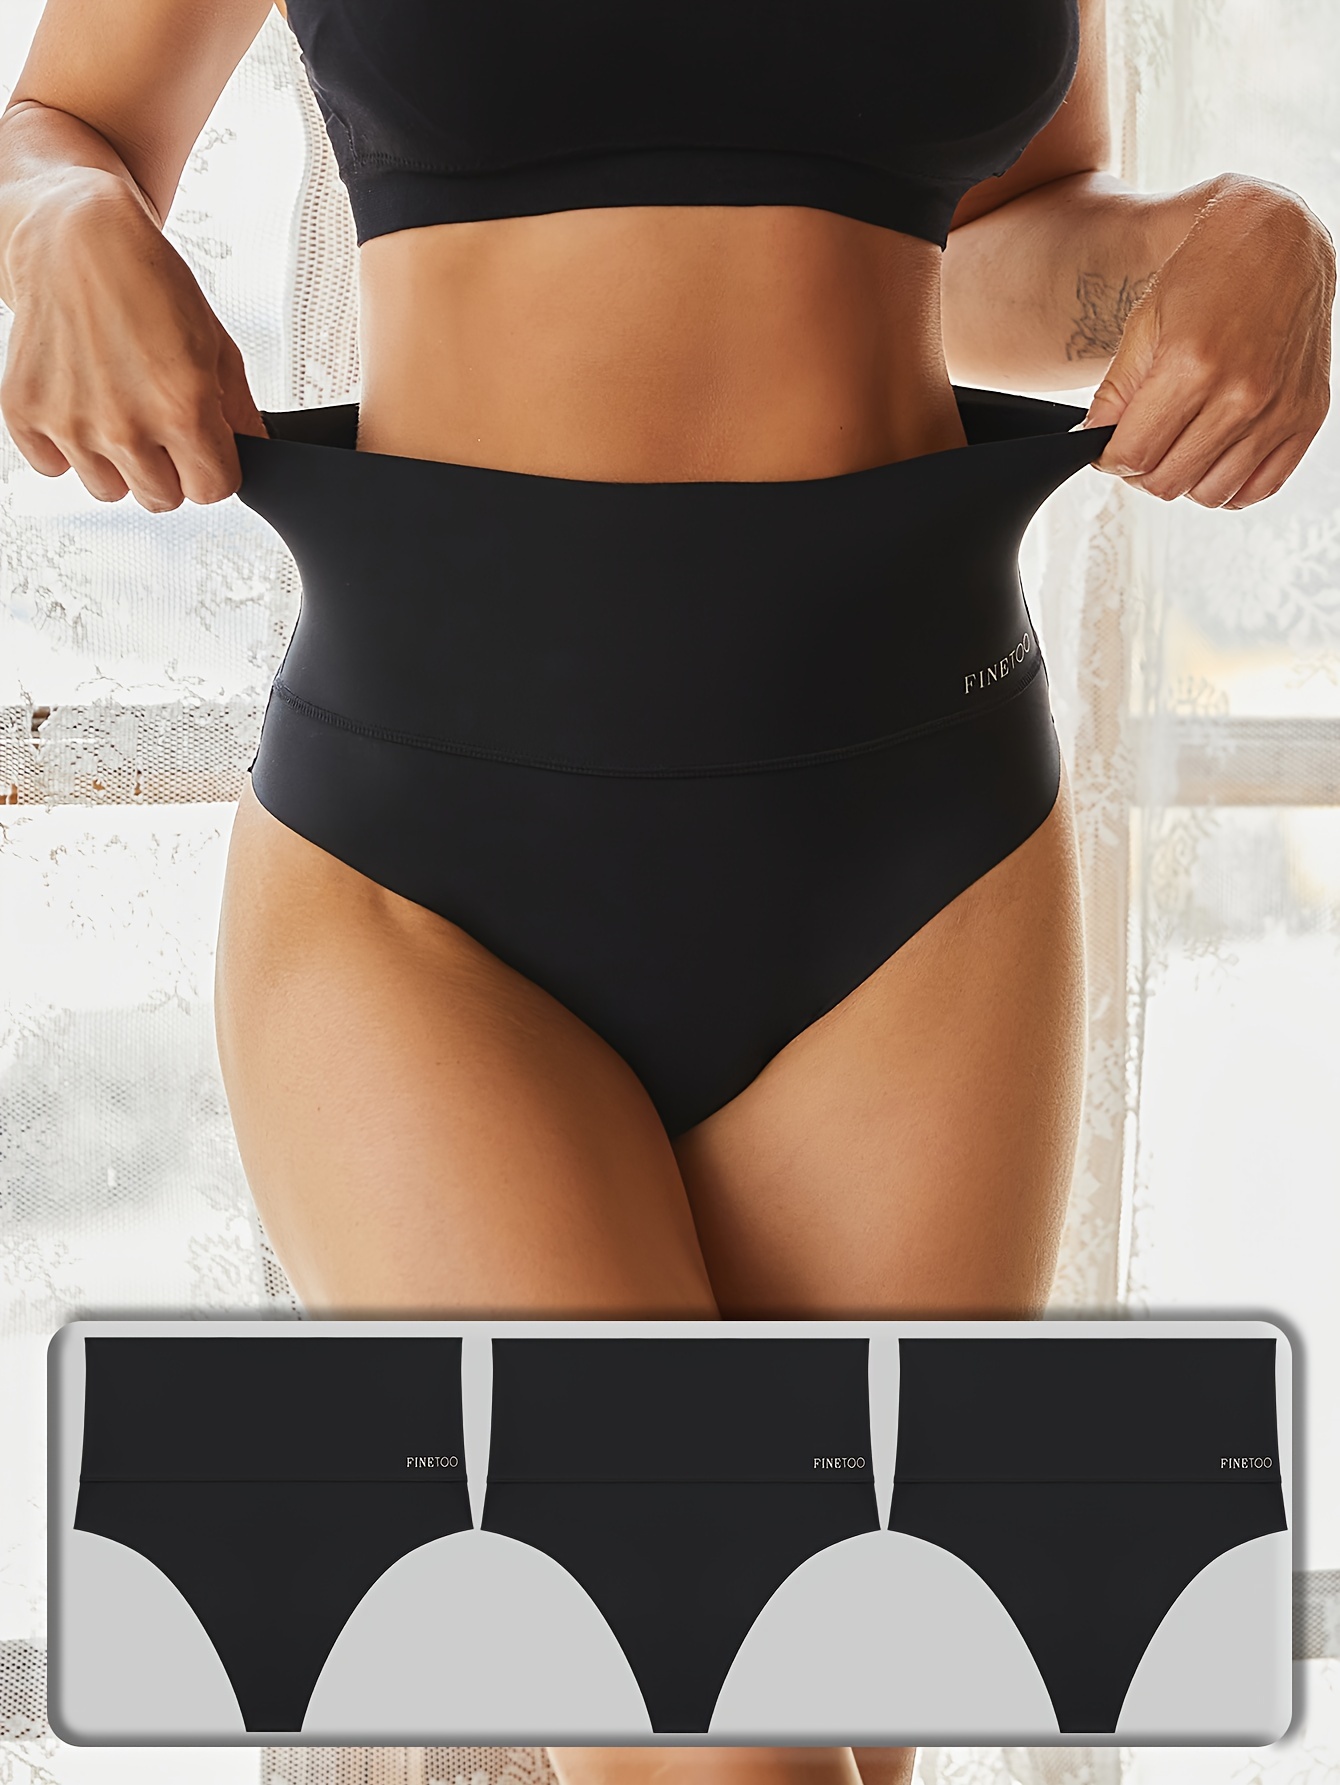 3pcs High Waist Thongs, Soft & Comfy Stretchy Intimates Panties, Women's  Lingerie & Underwear